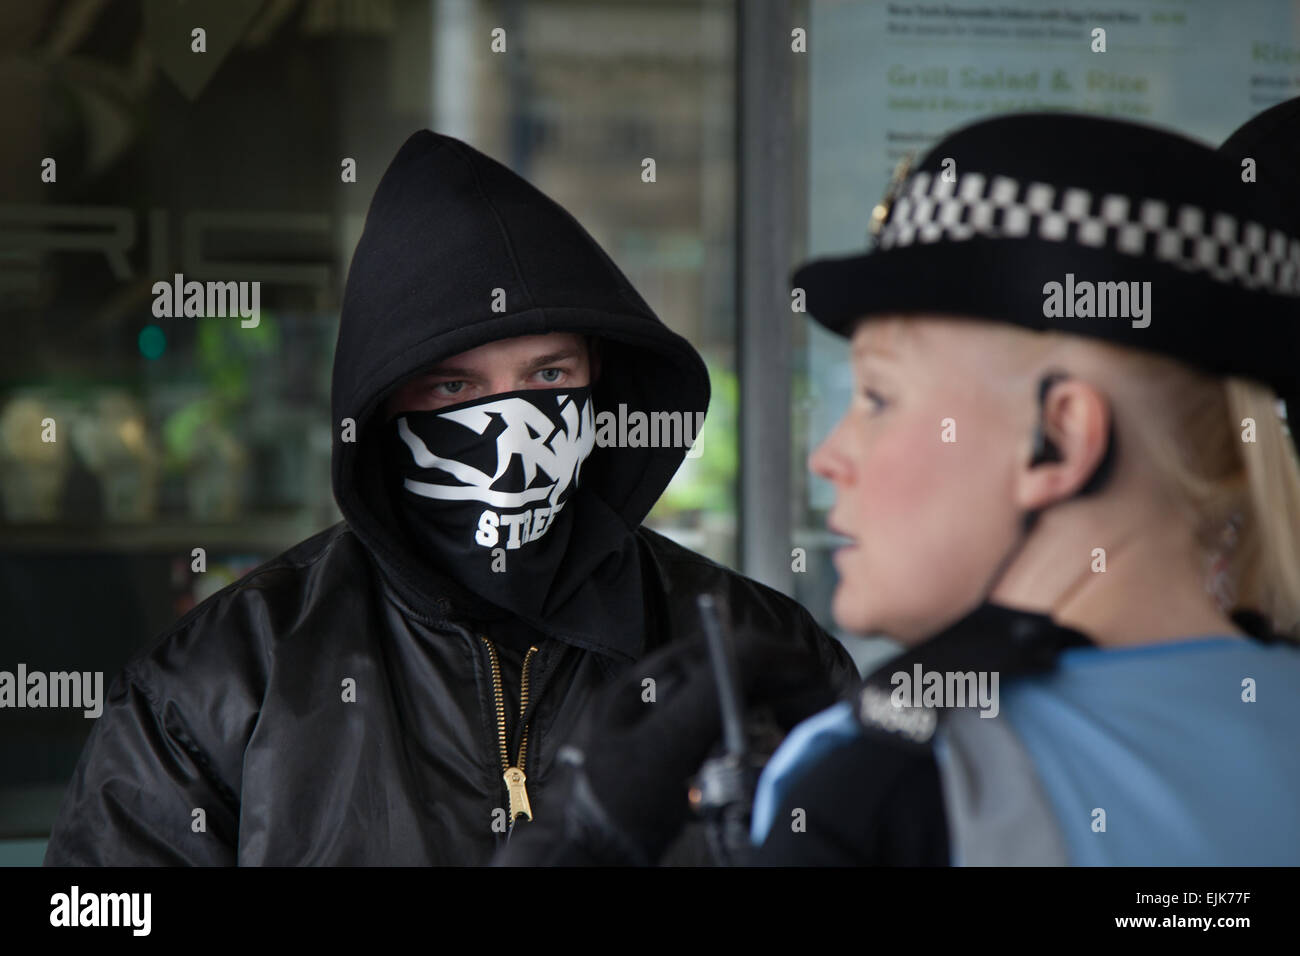 Masked demonstrator at the National Front neo-nazi rally & White Pride Demo in Piccadilly Manchester confronts a policewoman.  Arrests  made as Far Right 'White Pride' group gathered in Manchester to stage a demonstration. Around 50 members of the group waved flags and marched through Piccadilly Gardens.  Anti-fascist campaigners staged a counter-demonstration with police separating the two sides.  Greater Manchester Police said two arrests were made, one for a breach of the peace. The second was also held over a public order offence. Stock Photo